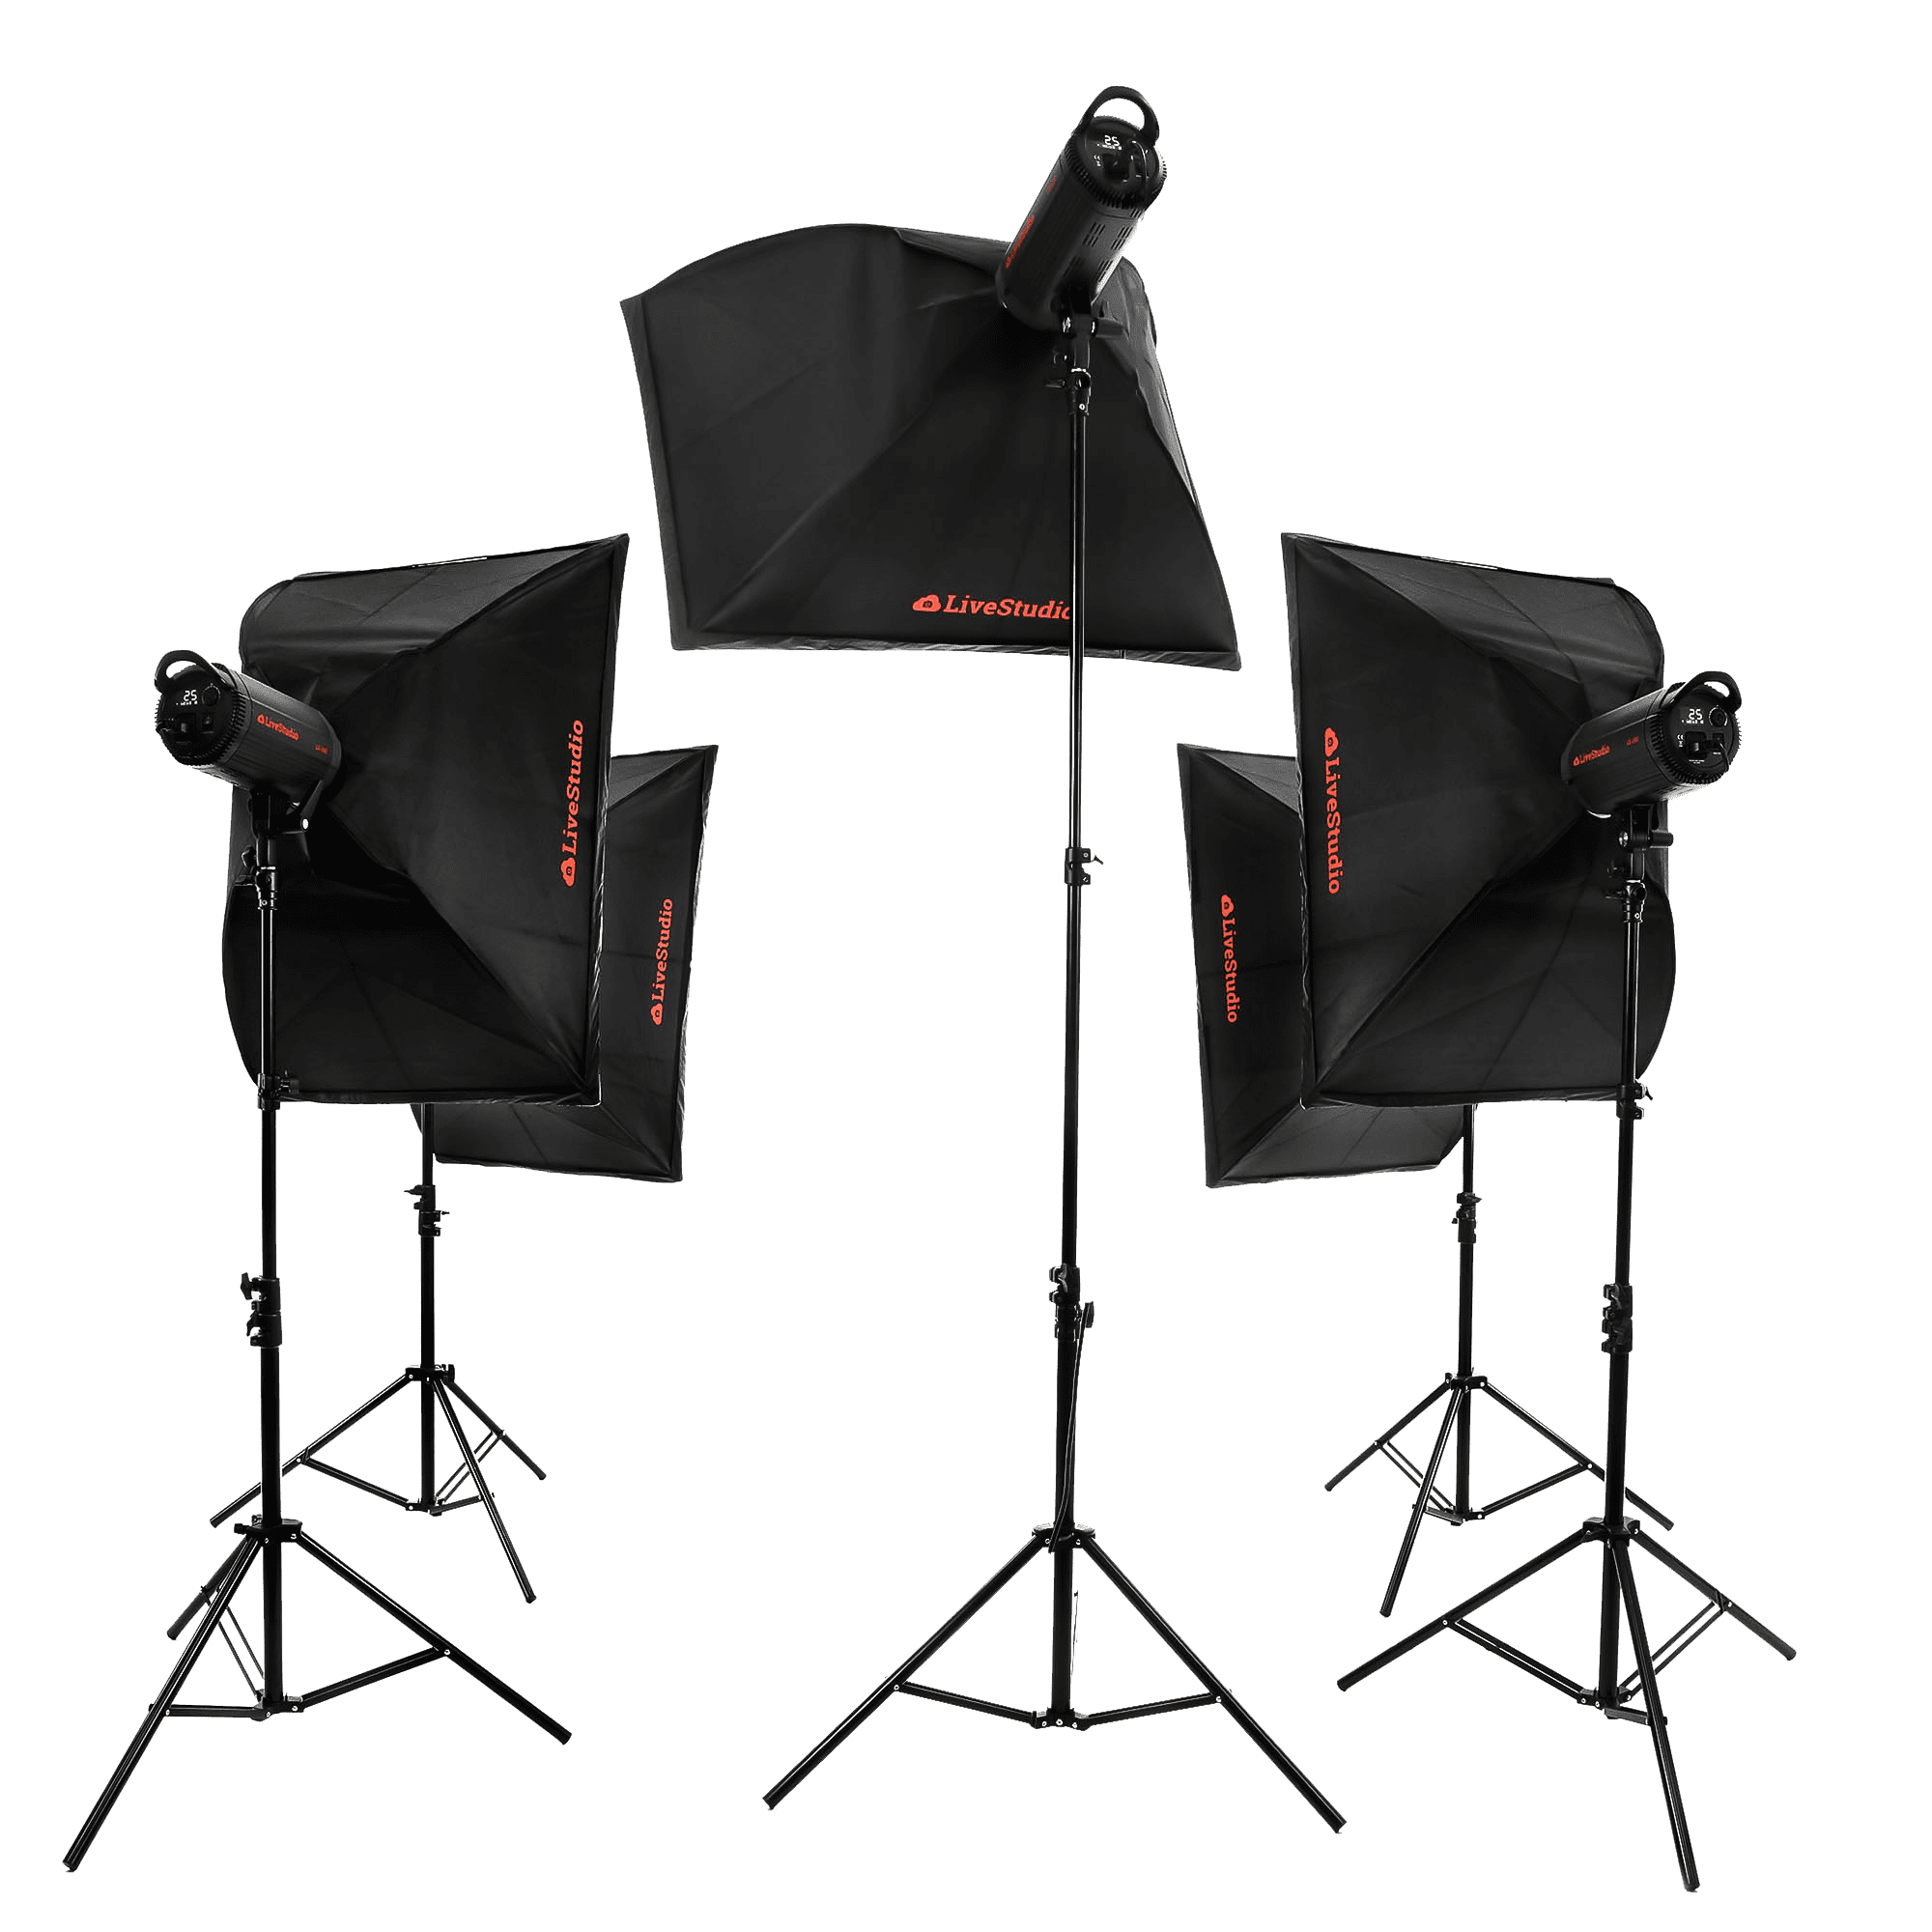 Ortery LiveStudio -5 light product photography kit and software